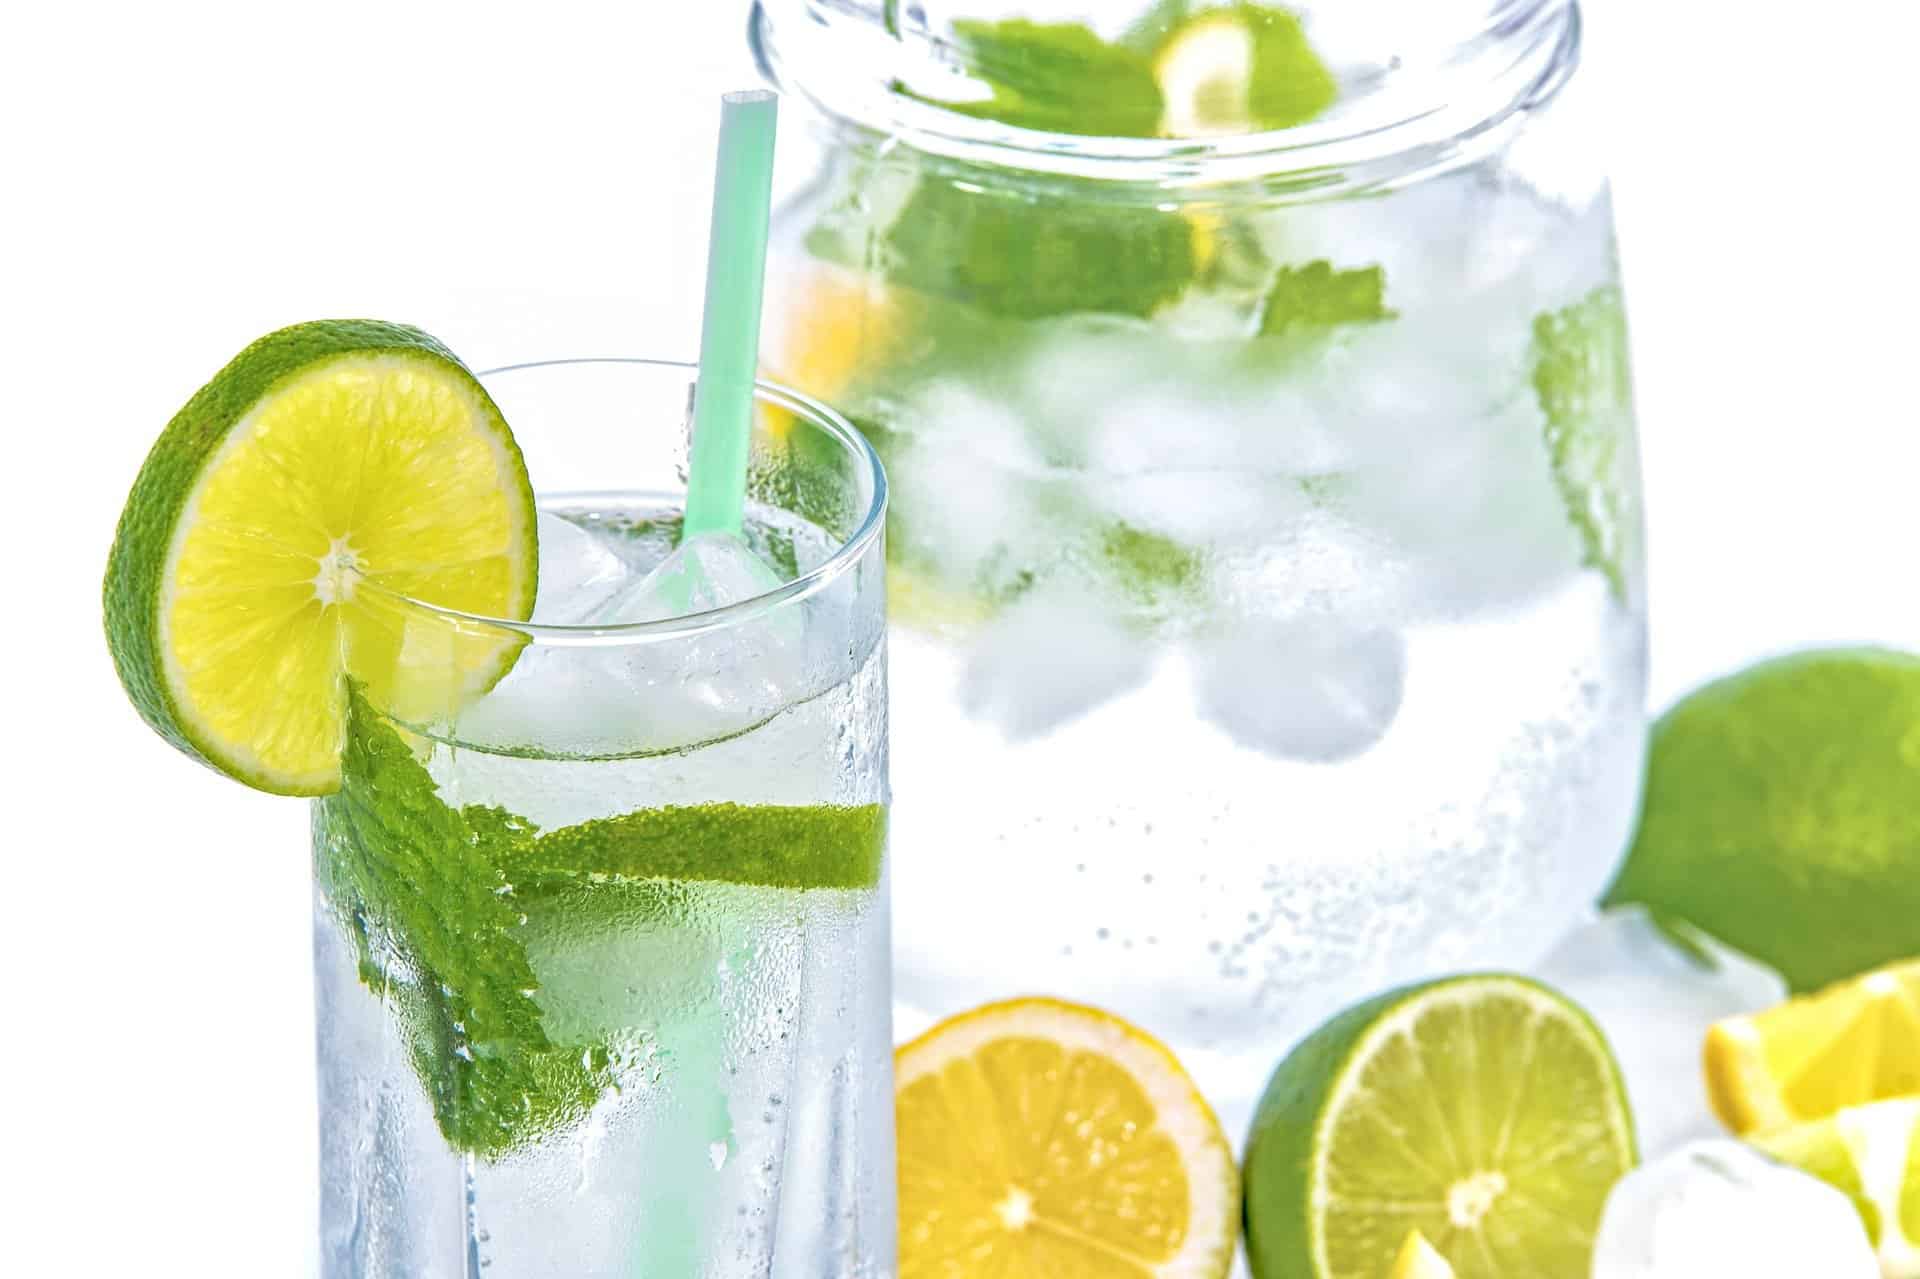 Is your teen drinking enough water? Did you know it's an important key to taming their attitude? Find out why hydration in teens is so important.